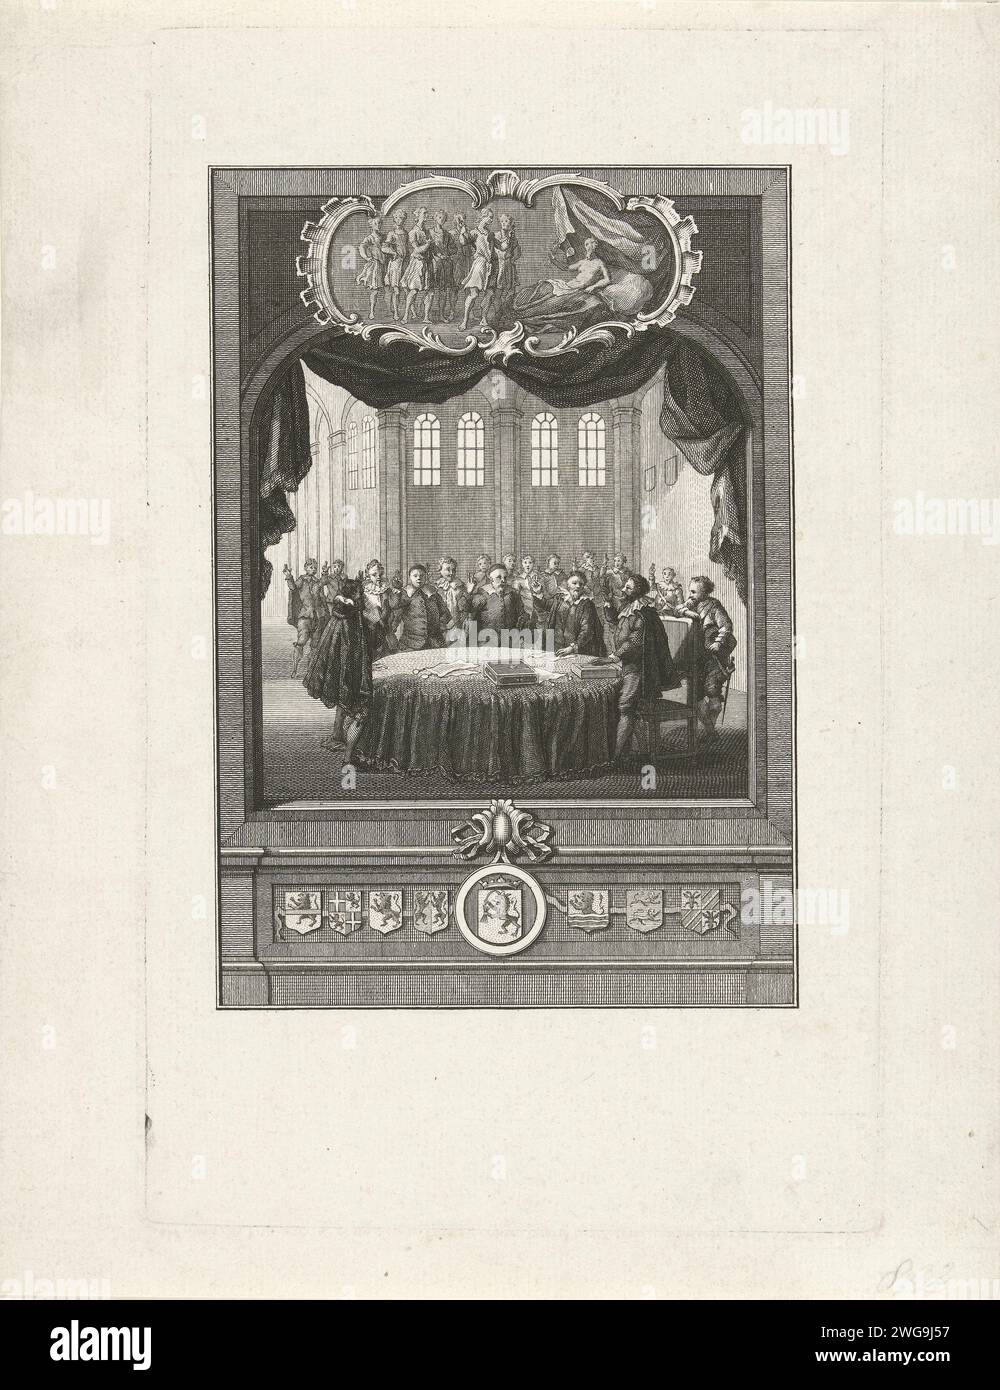 Closing the Union of Utrecht, 1579, 1768 - 1770 print Closing the Union of Utrecht. View of interior with a curtain on top in which a group of men standing around a table taking an oath, January 23, 1579. At the top a cartouche with a representation of the case law of Count William III in 1336. At the bottom of the weapons of the seven provinces. Northern Netherlands paper etching swearing an oath (with two fingers raised). alliance, league, union, foedus Stock Photo